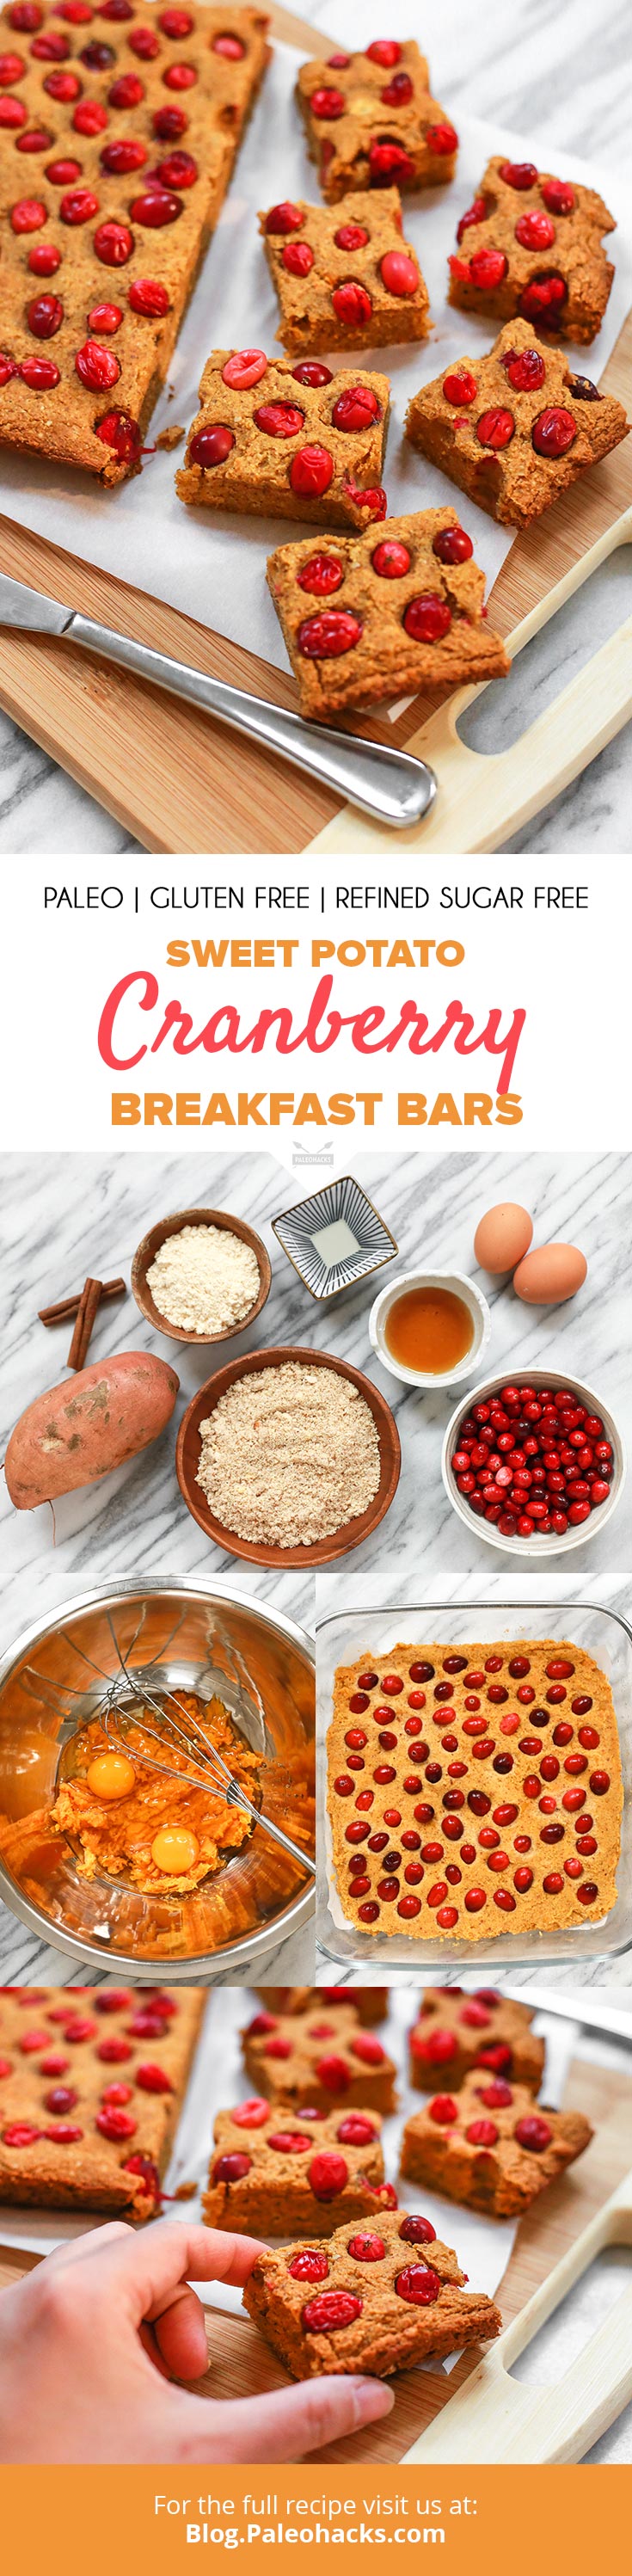 These naturally sweetened bars are filled with nourishing ingredients for a quick, on-the-go breakfast.